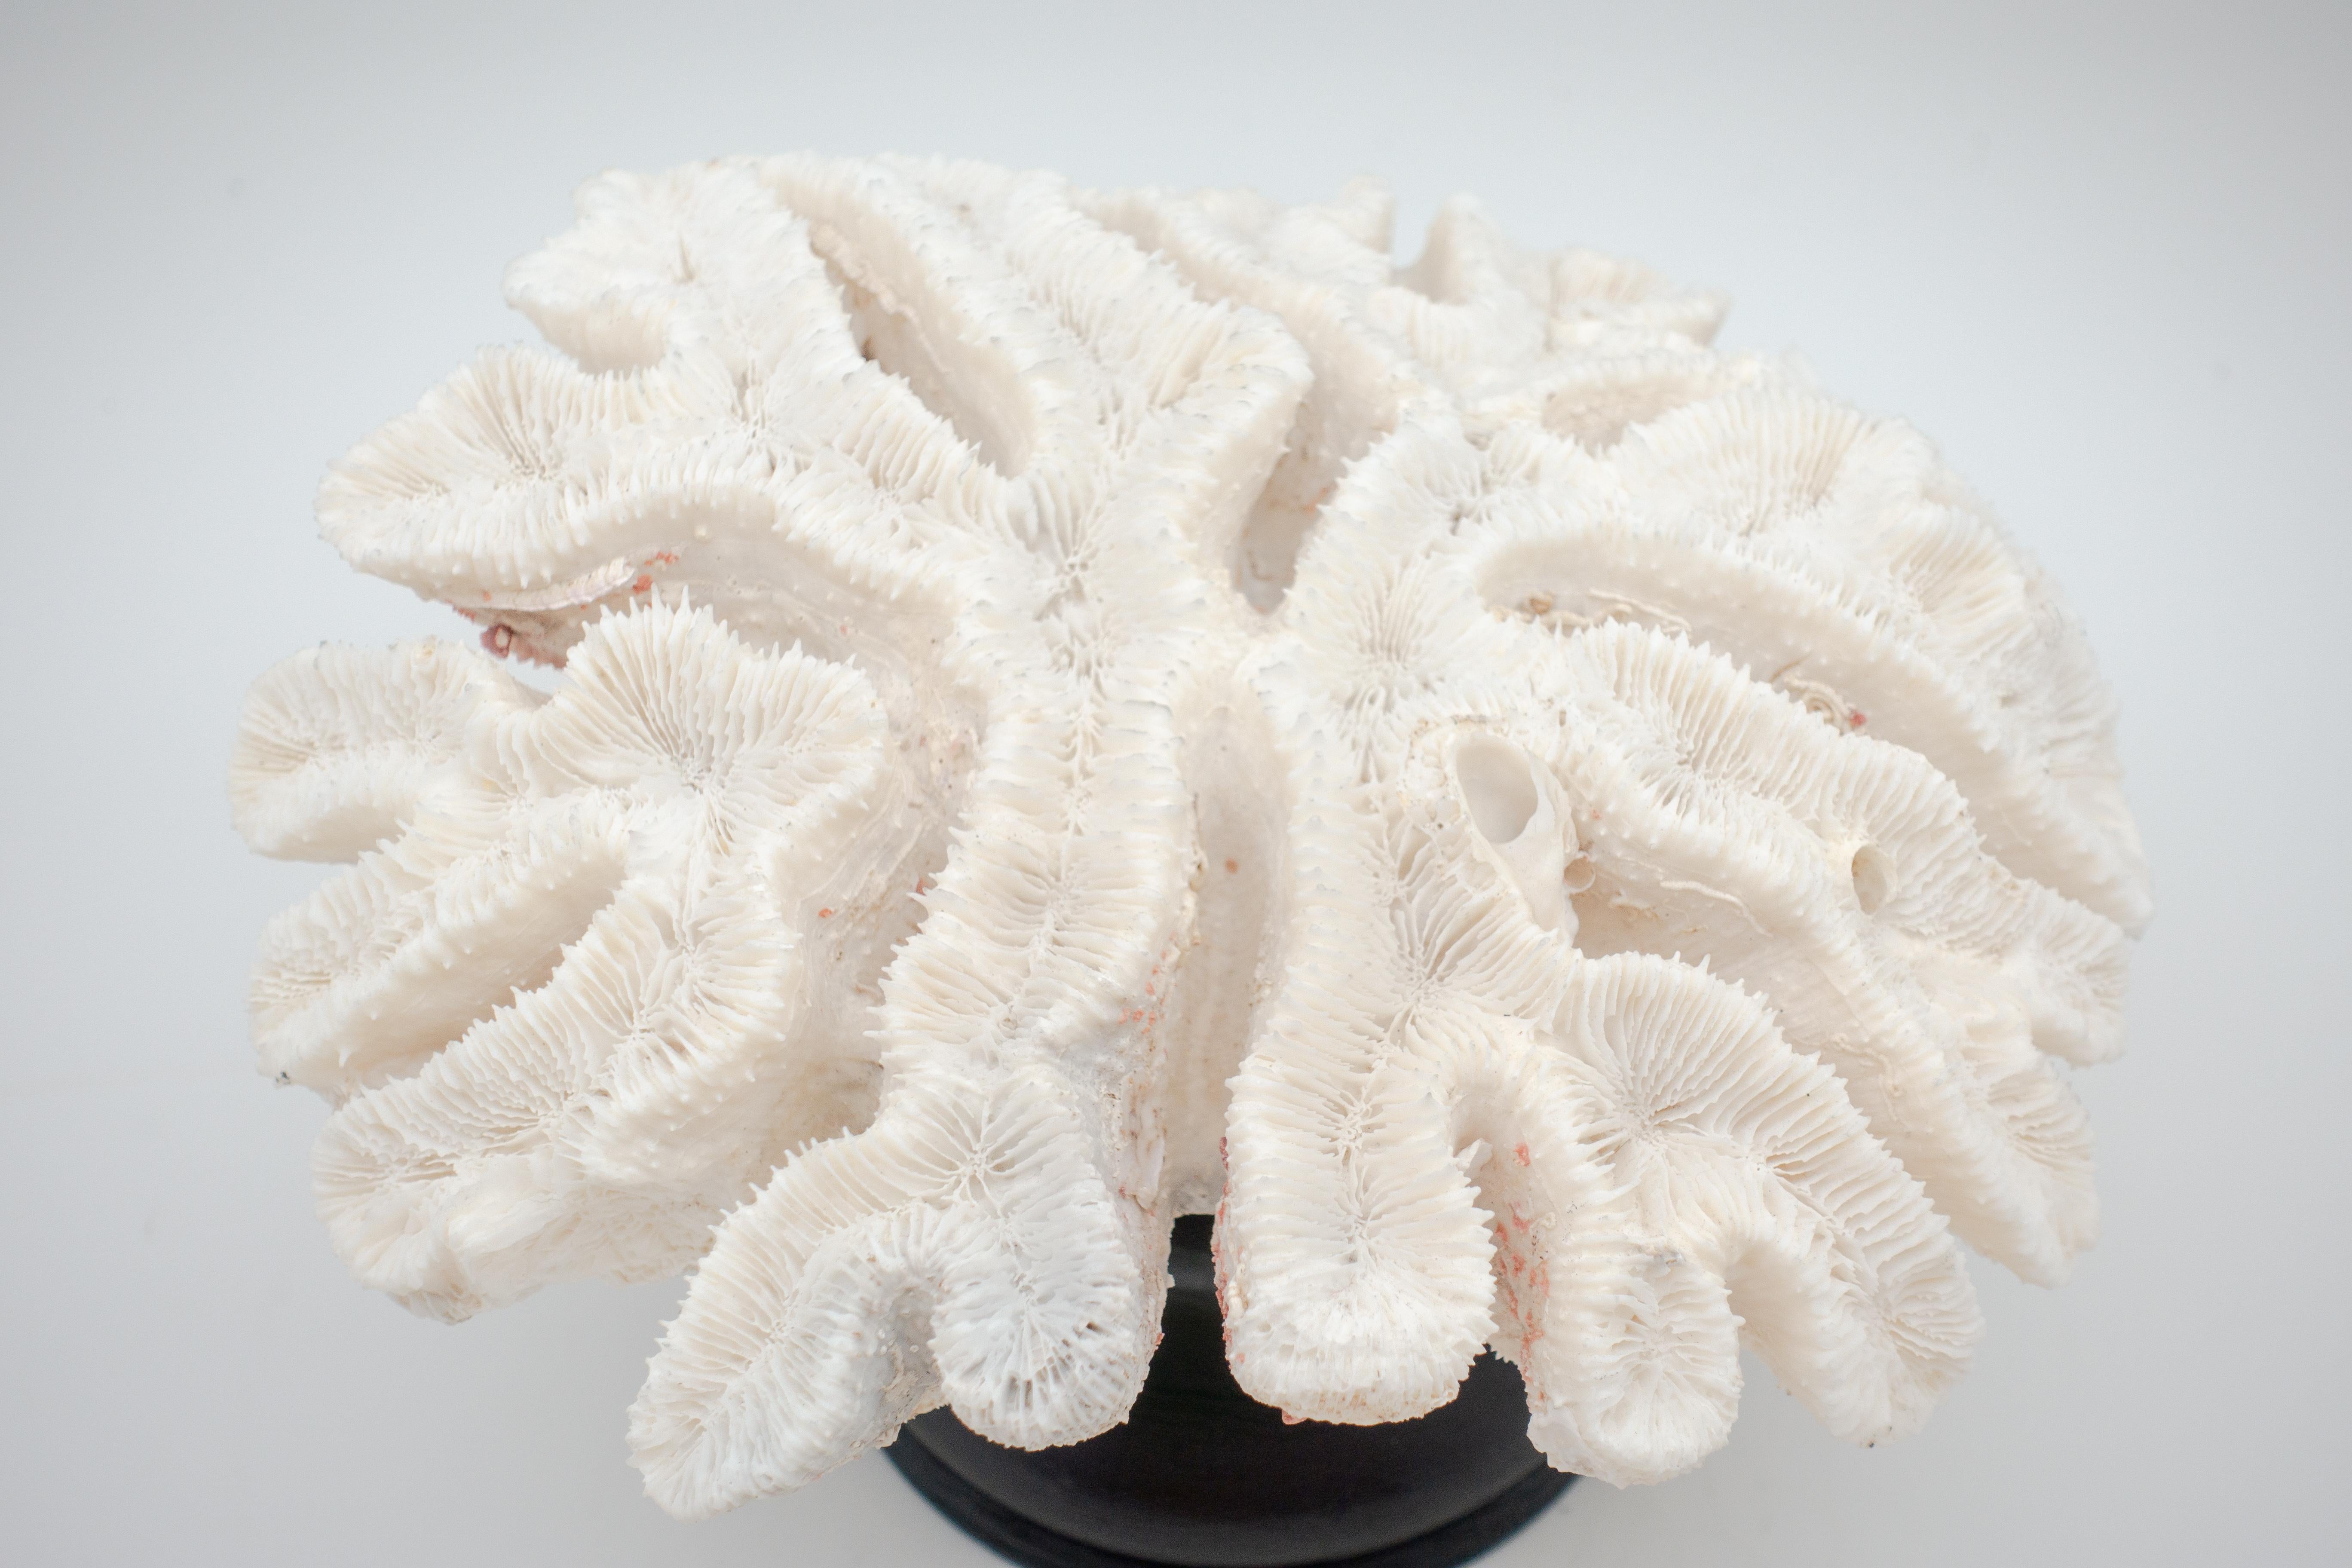 Large white flower coral from the Solomon Islands mounted on a turned wooden black base.